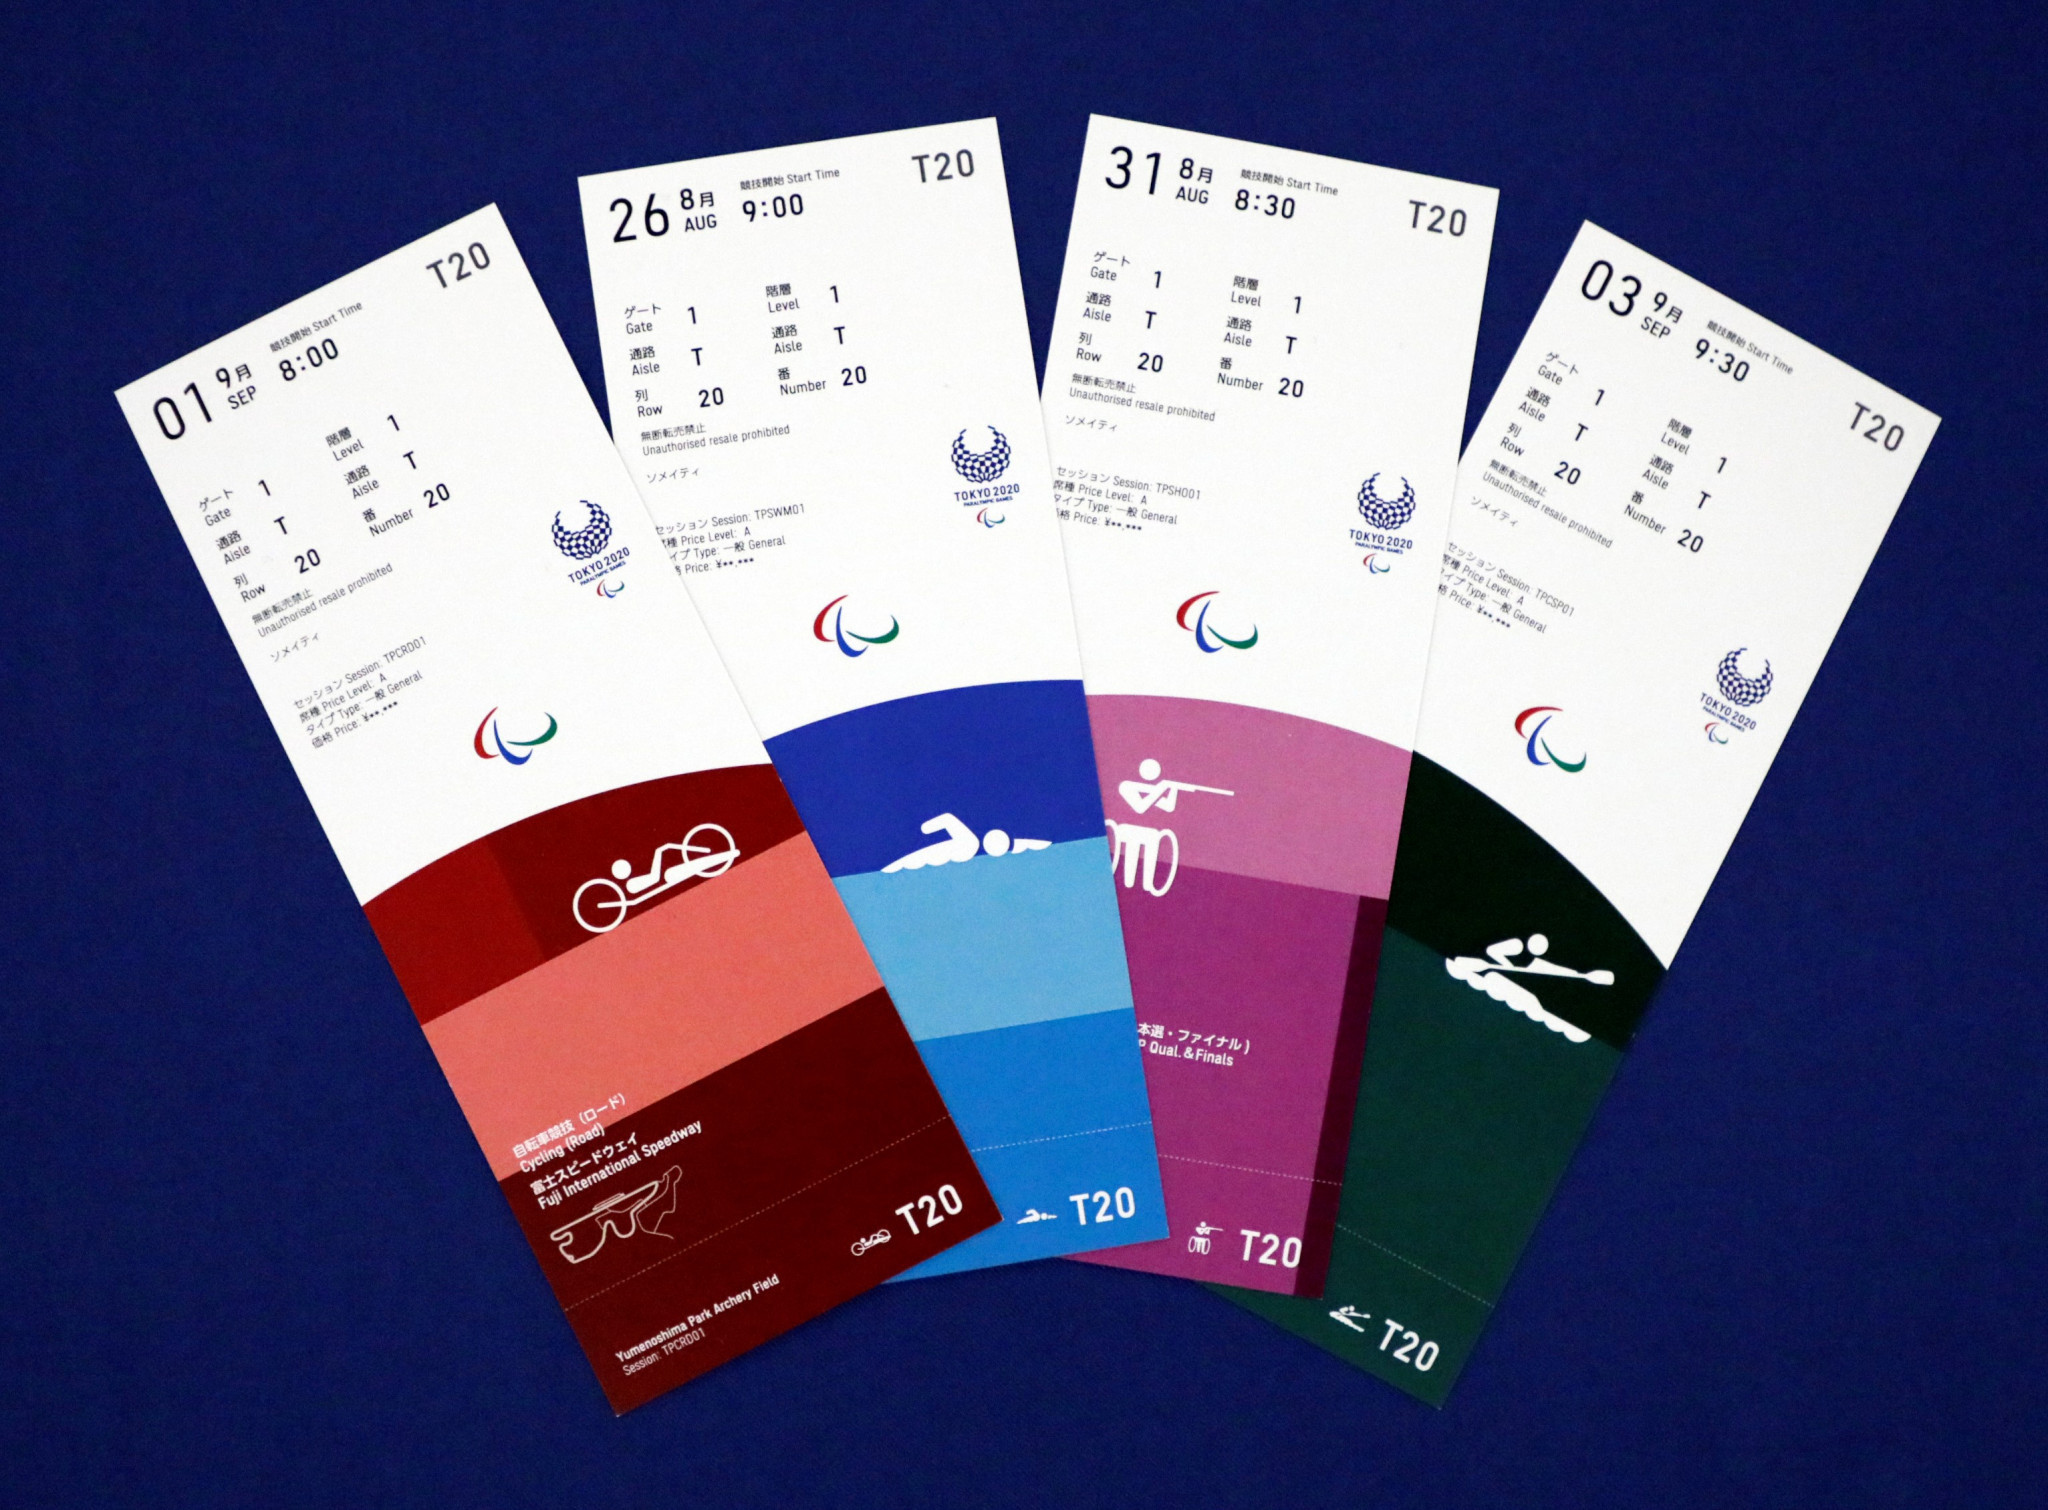 The Paralympic tickets unveiled today by organisers ©Tokyo 2020